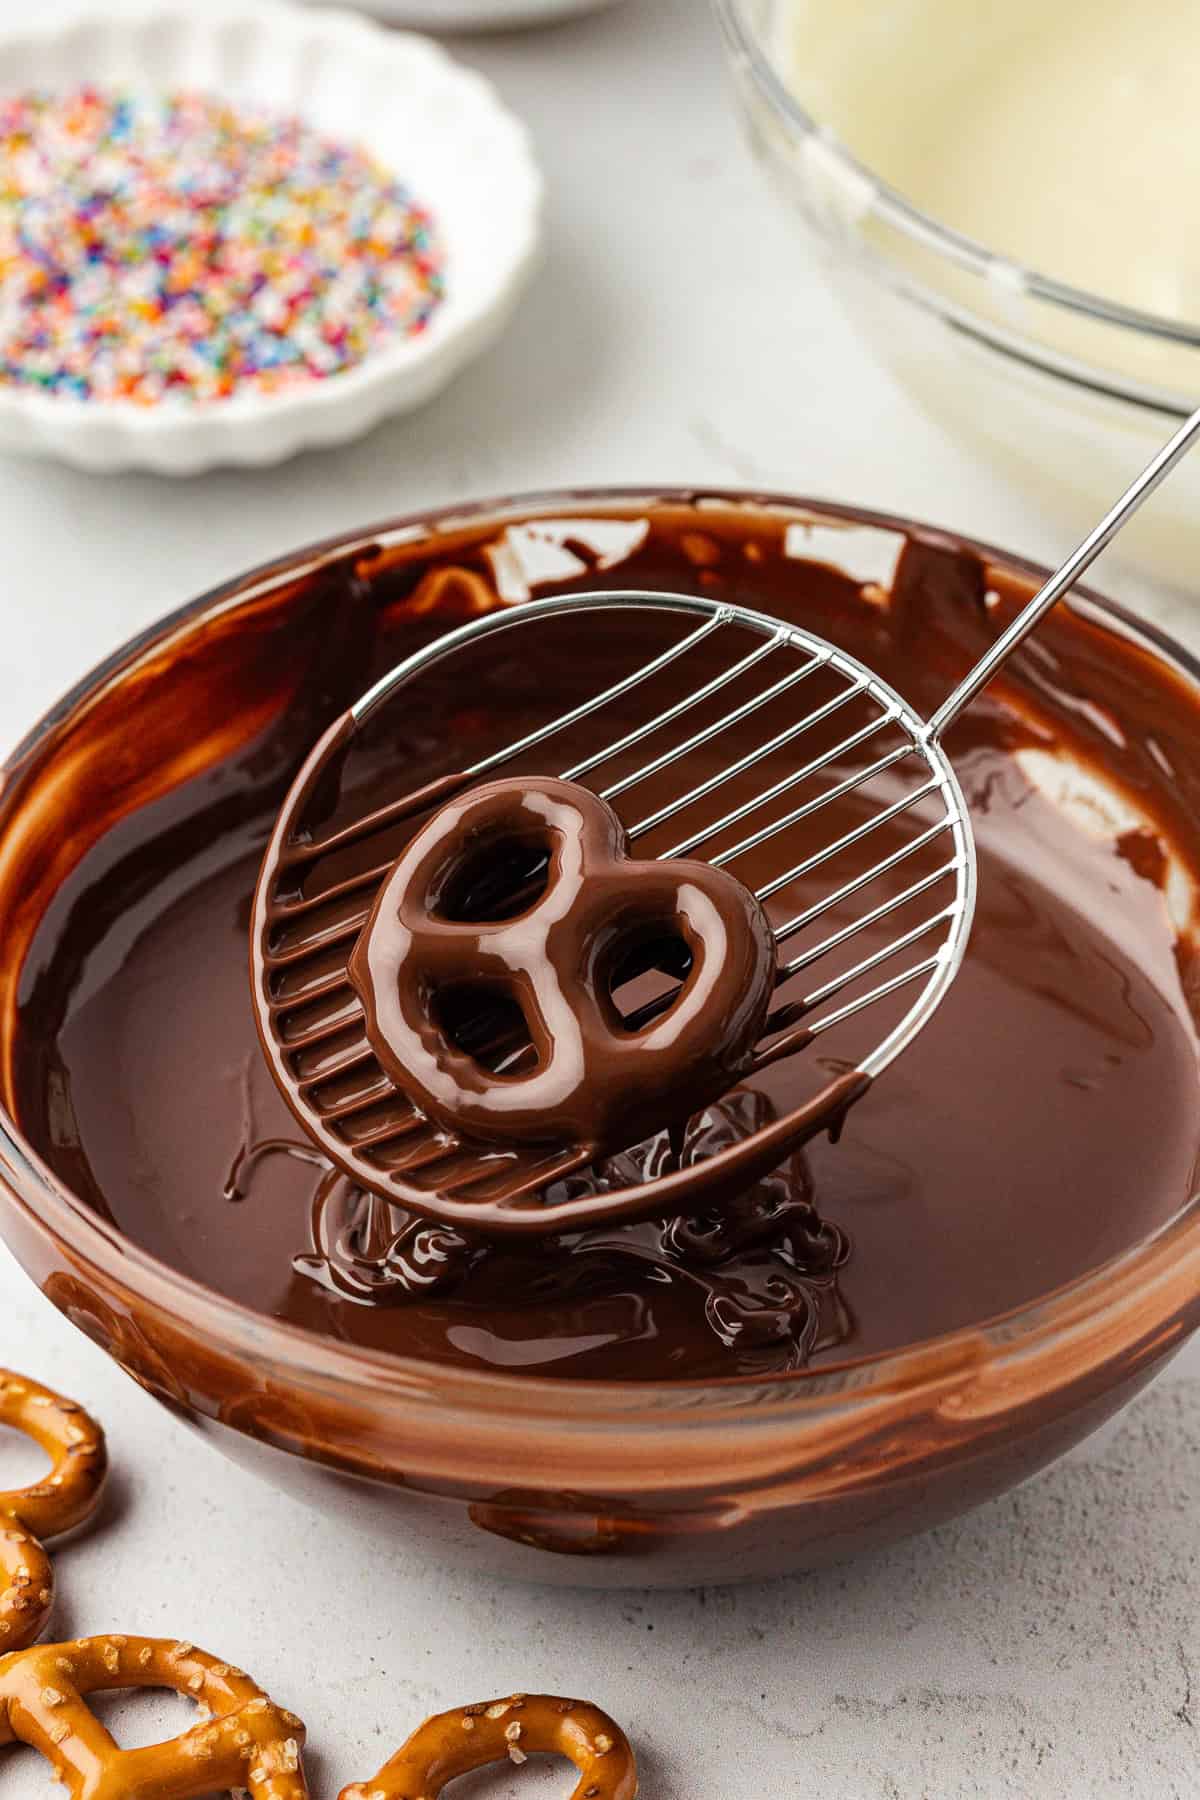 a chocolate covered pretzel being lifted out of a clear glass bowl full of melted chocolate, with a few pretzels scattered around, a white bowl of rainbow sprinkles and a clear glass bowl of melted white chocolate in the background